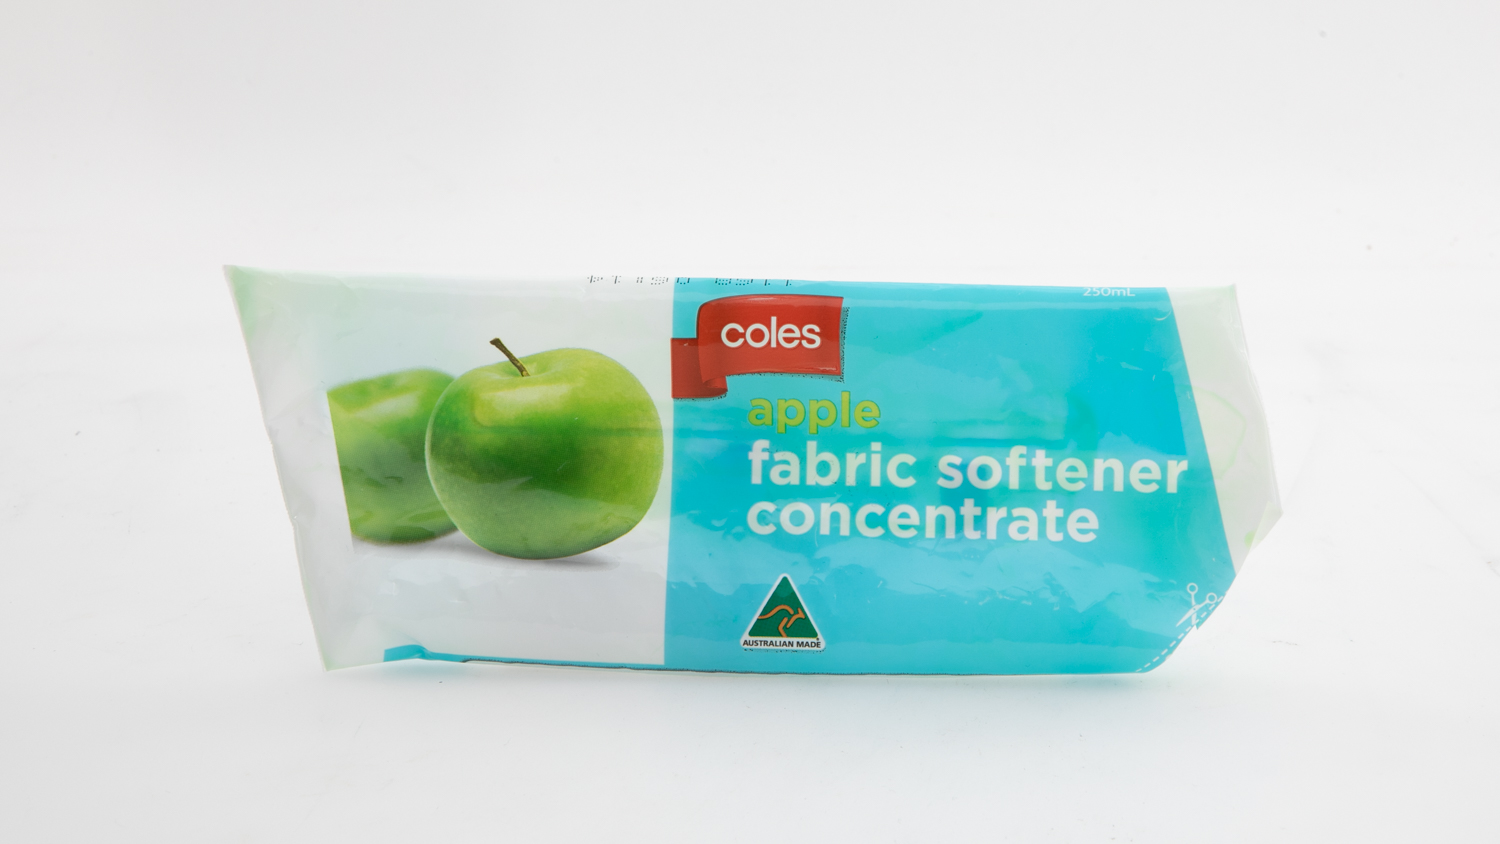 Coles Apple Fabric Softener Concentrate carousel image